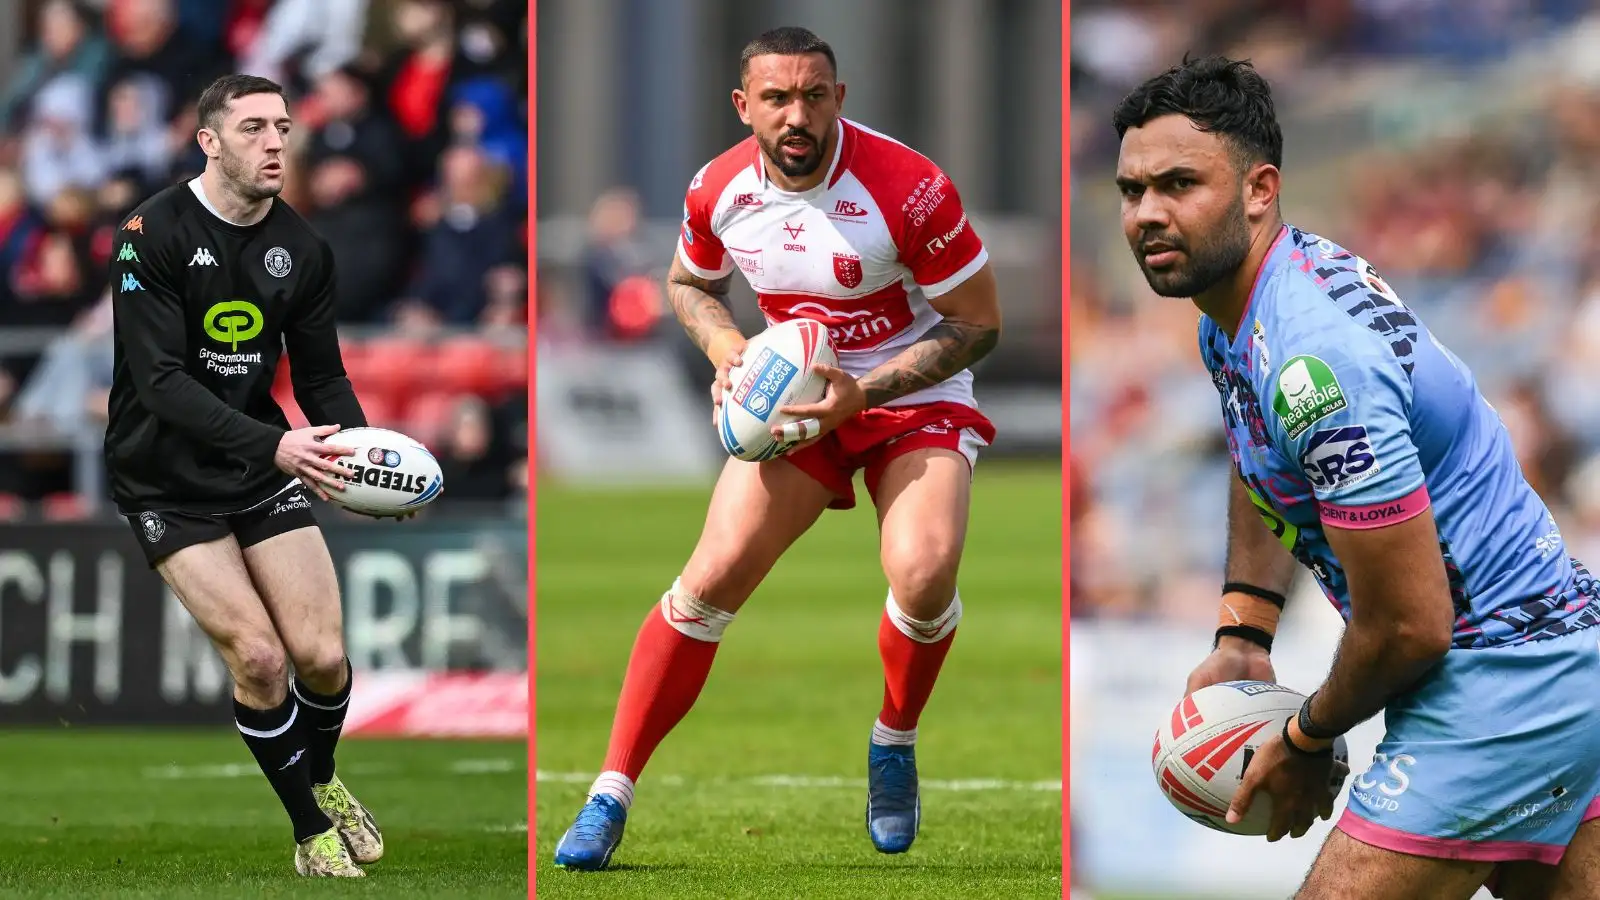 An incredible combined XIII of Wigan Warriors & Hull KR stars